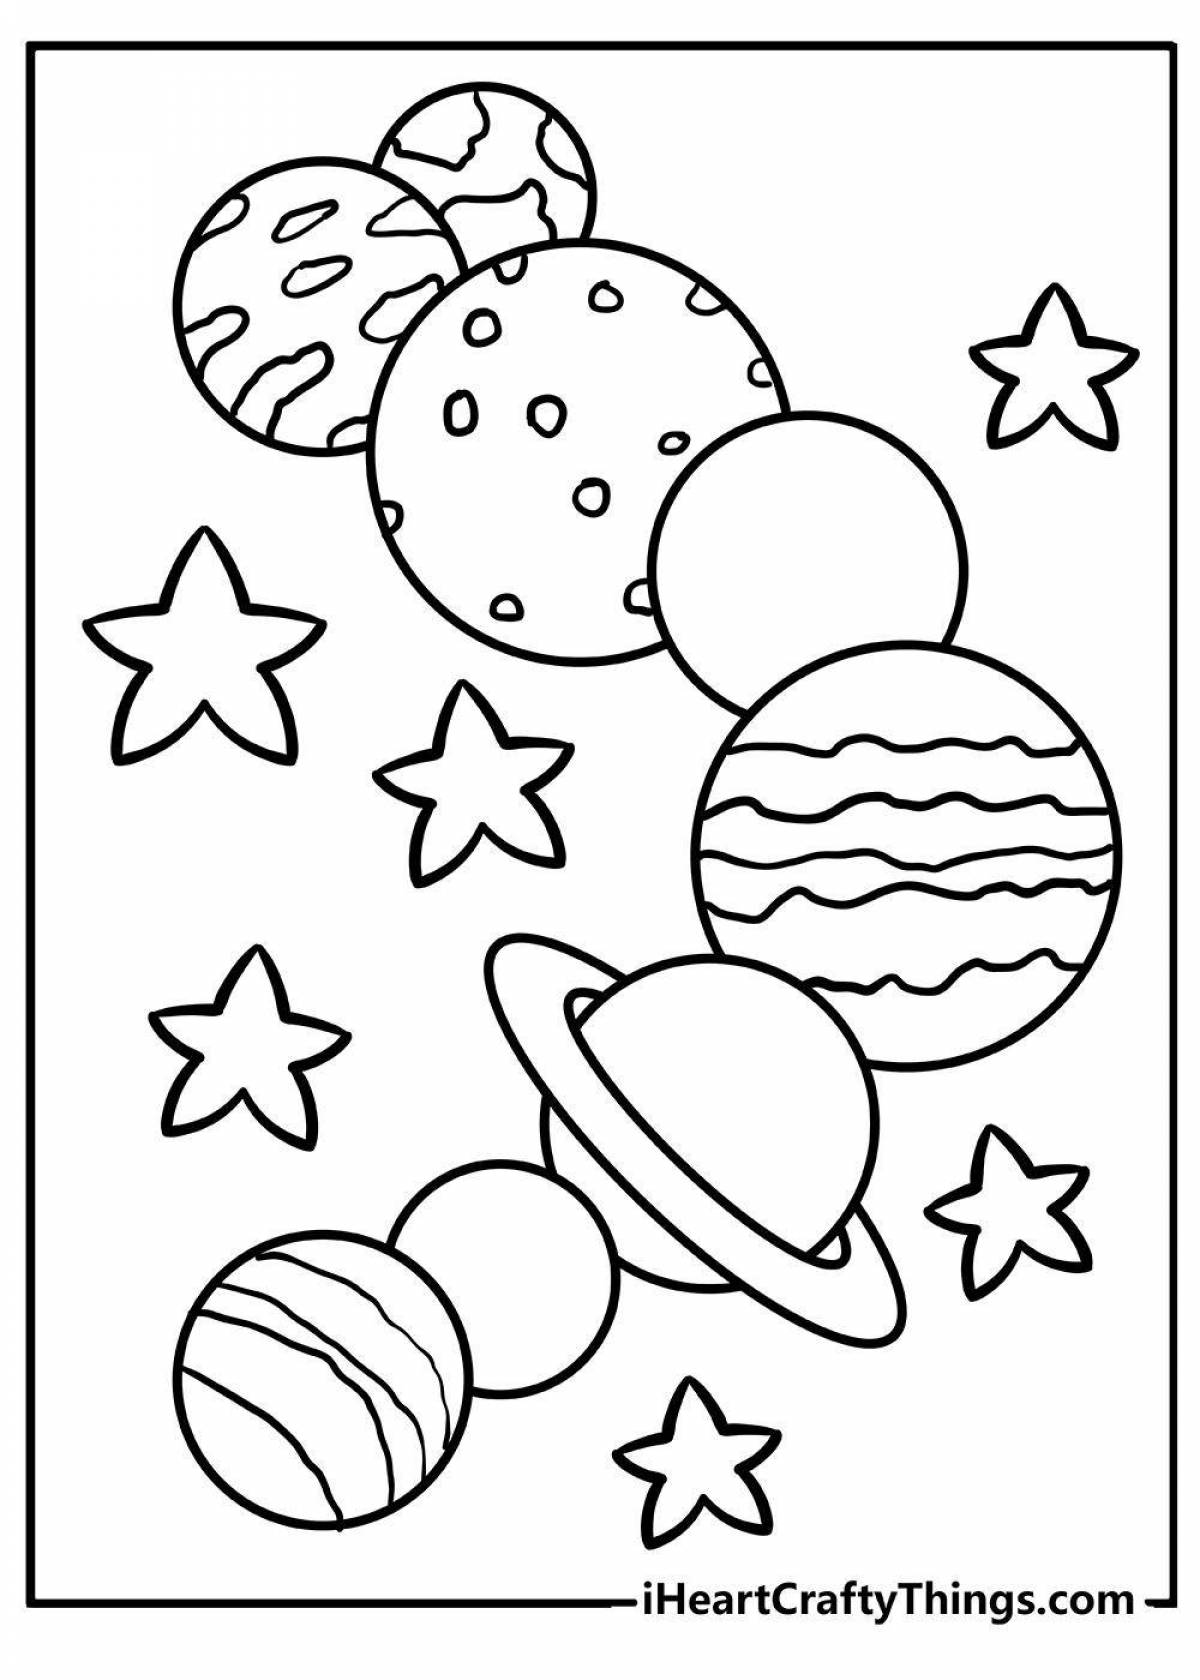 Magic planet coloring by numbers